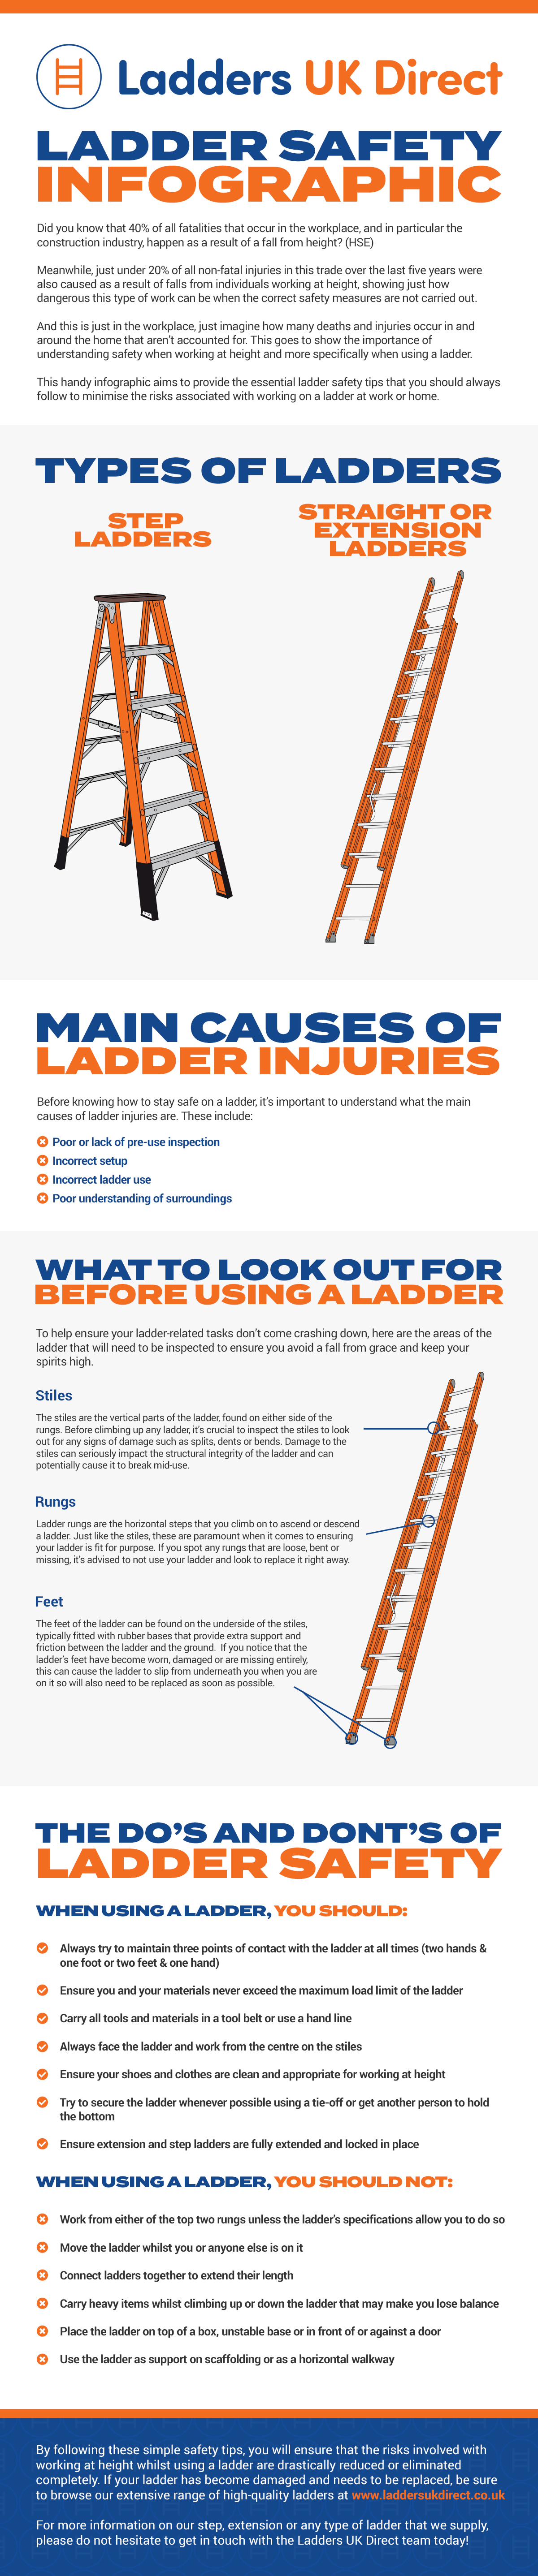 Ladder Safety Infographic